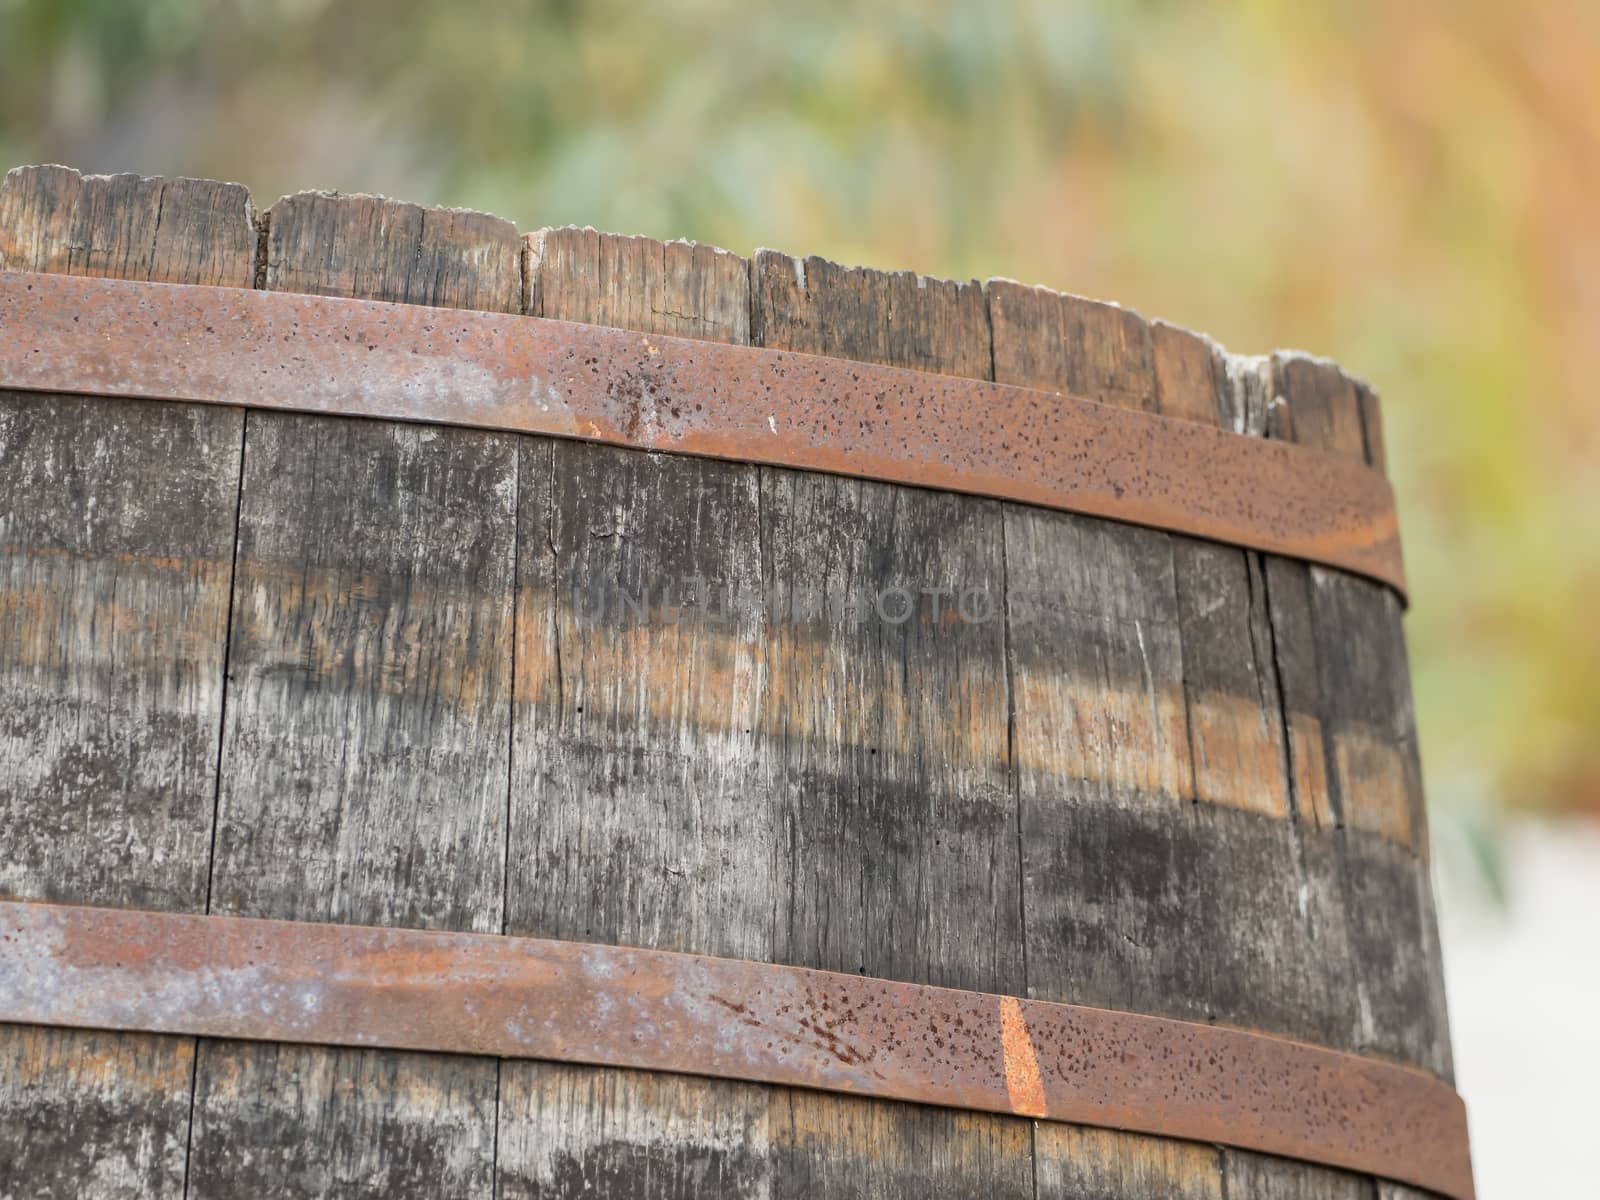 A old wooden barrel, used look by sandra_fotodesign